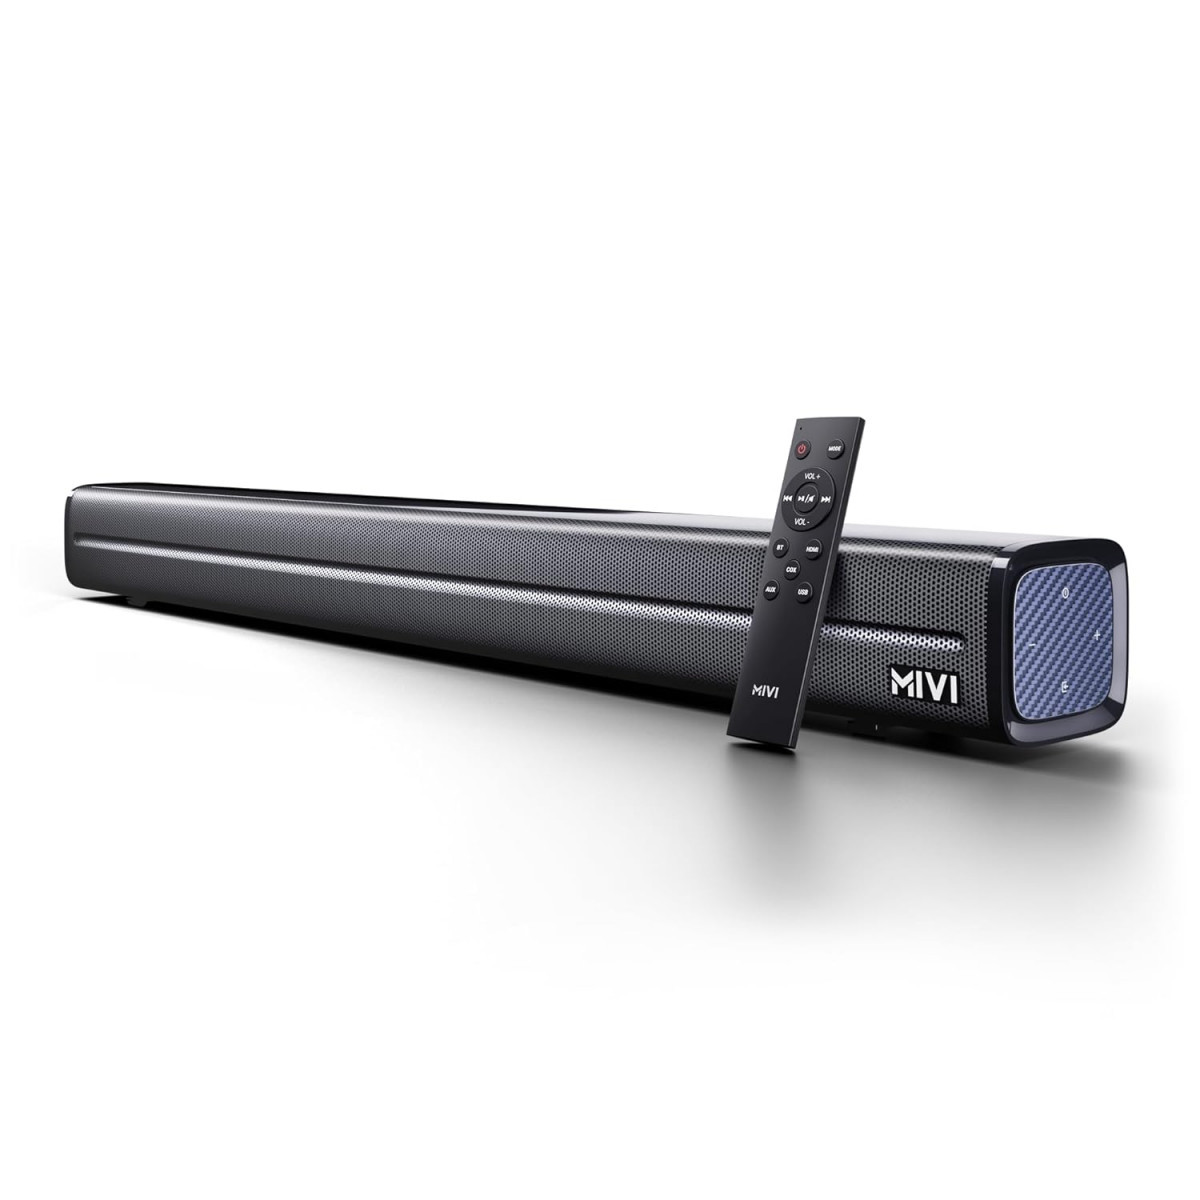 Mivi Fort Q80 Soundbar with 80W Surround Sound 22 Channel soundbar with 2 in-Built subwoofers Multiple EQ and Input Modes Remote Accessibility Bluetooth v51 Made in India Sound bar for TV